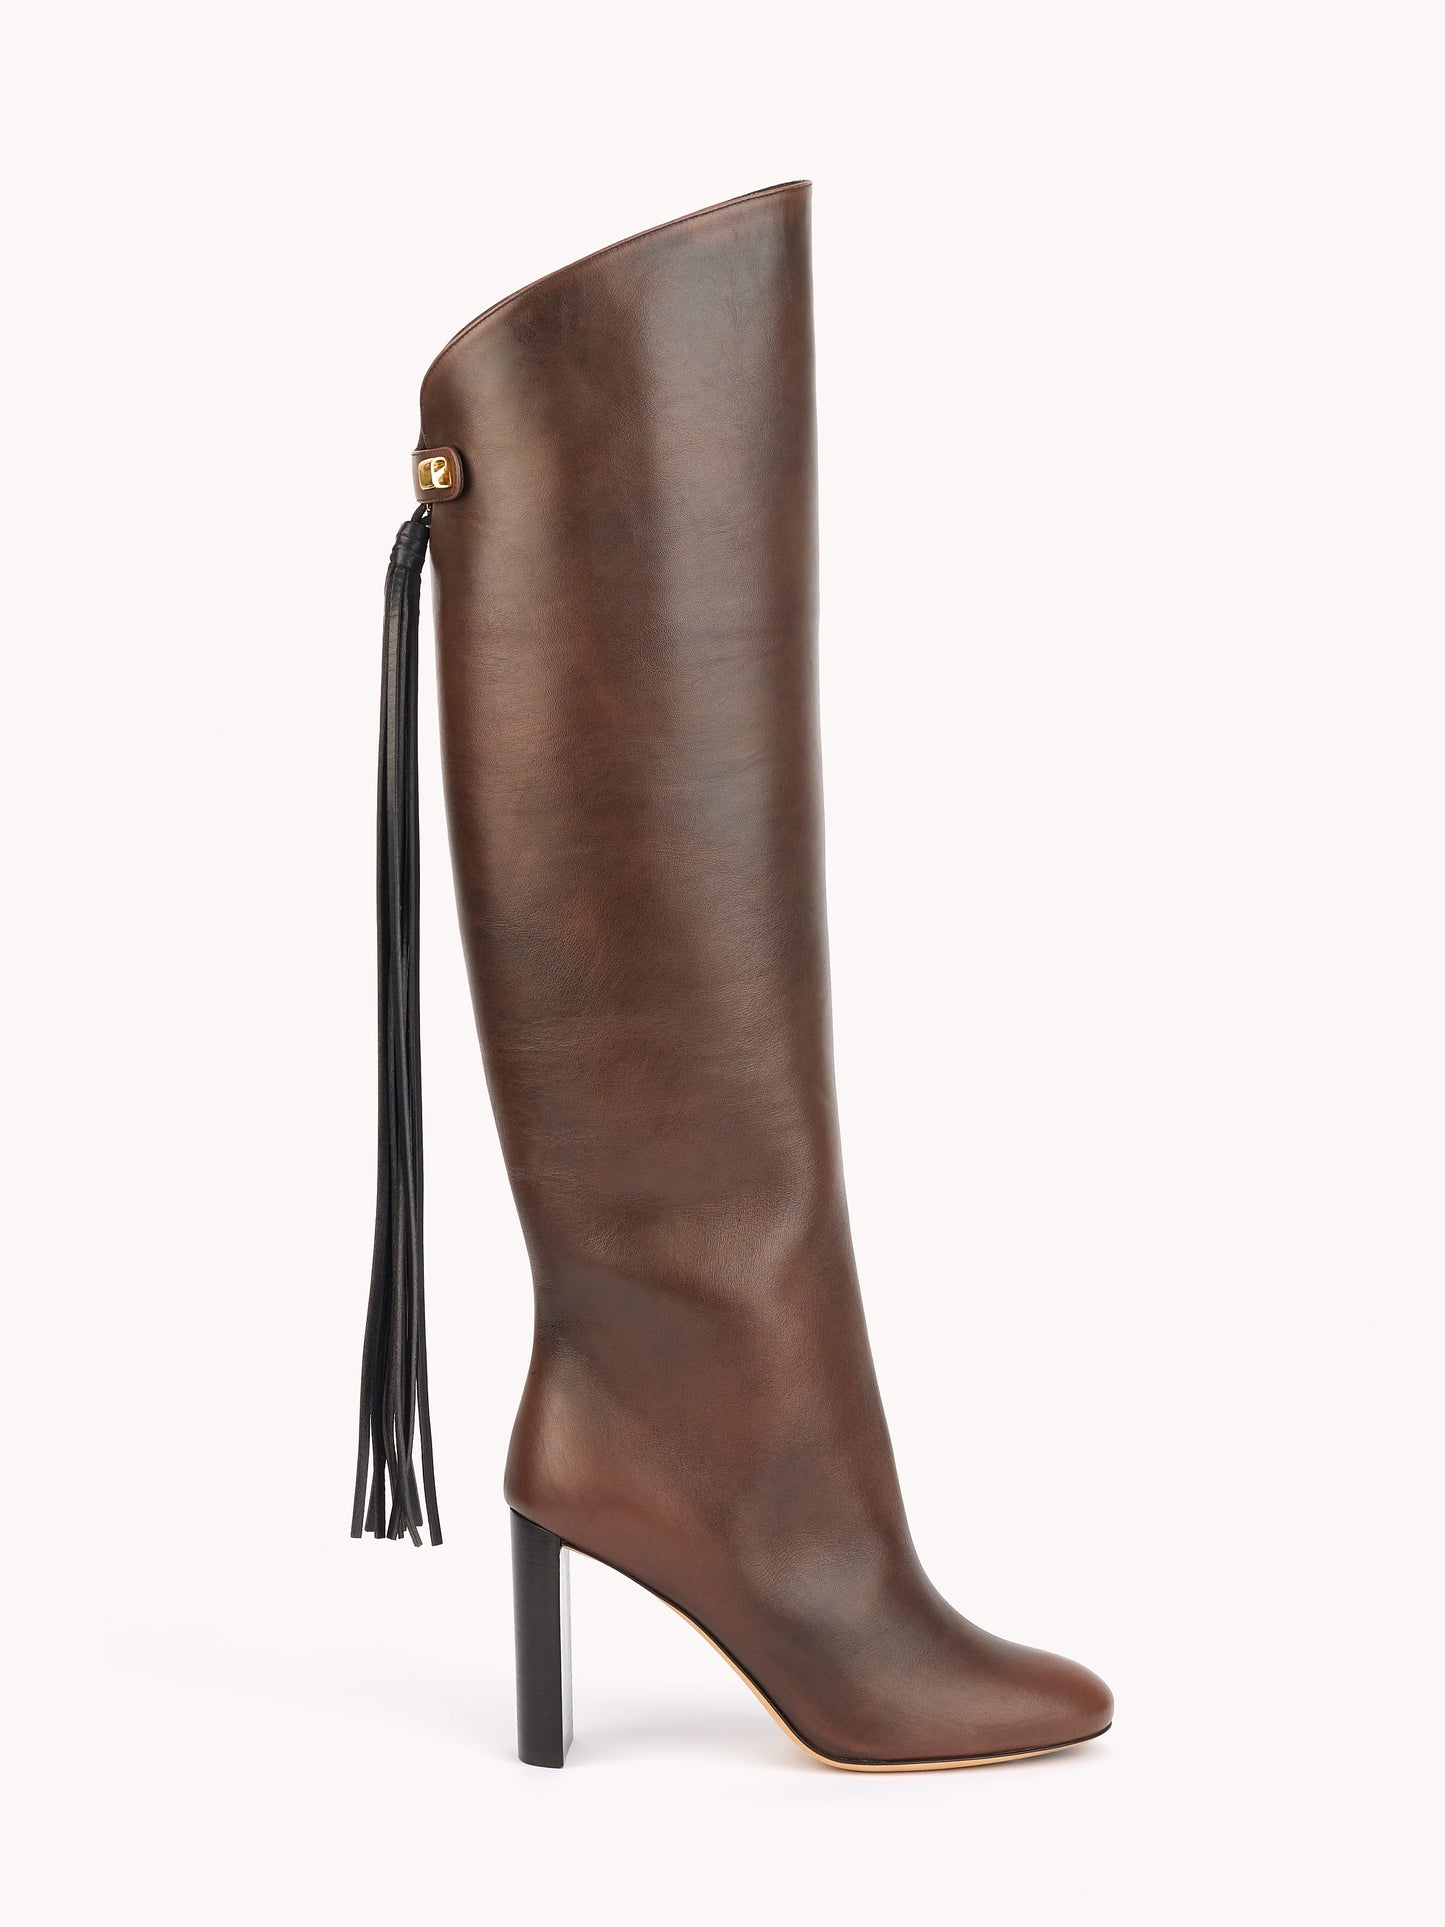 luxury equestrian brown chocolate leather boots with high heels skorpios